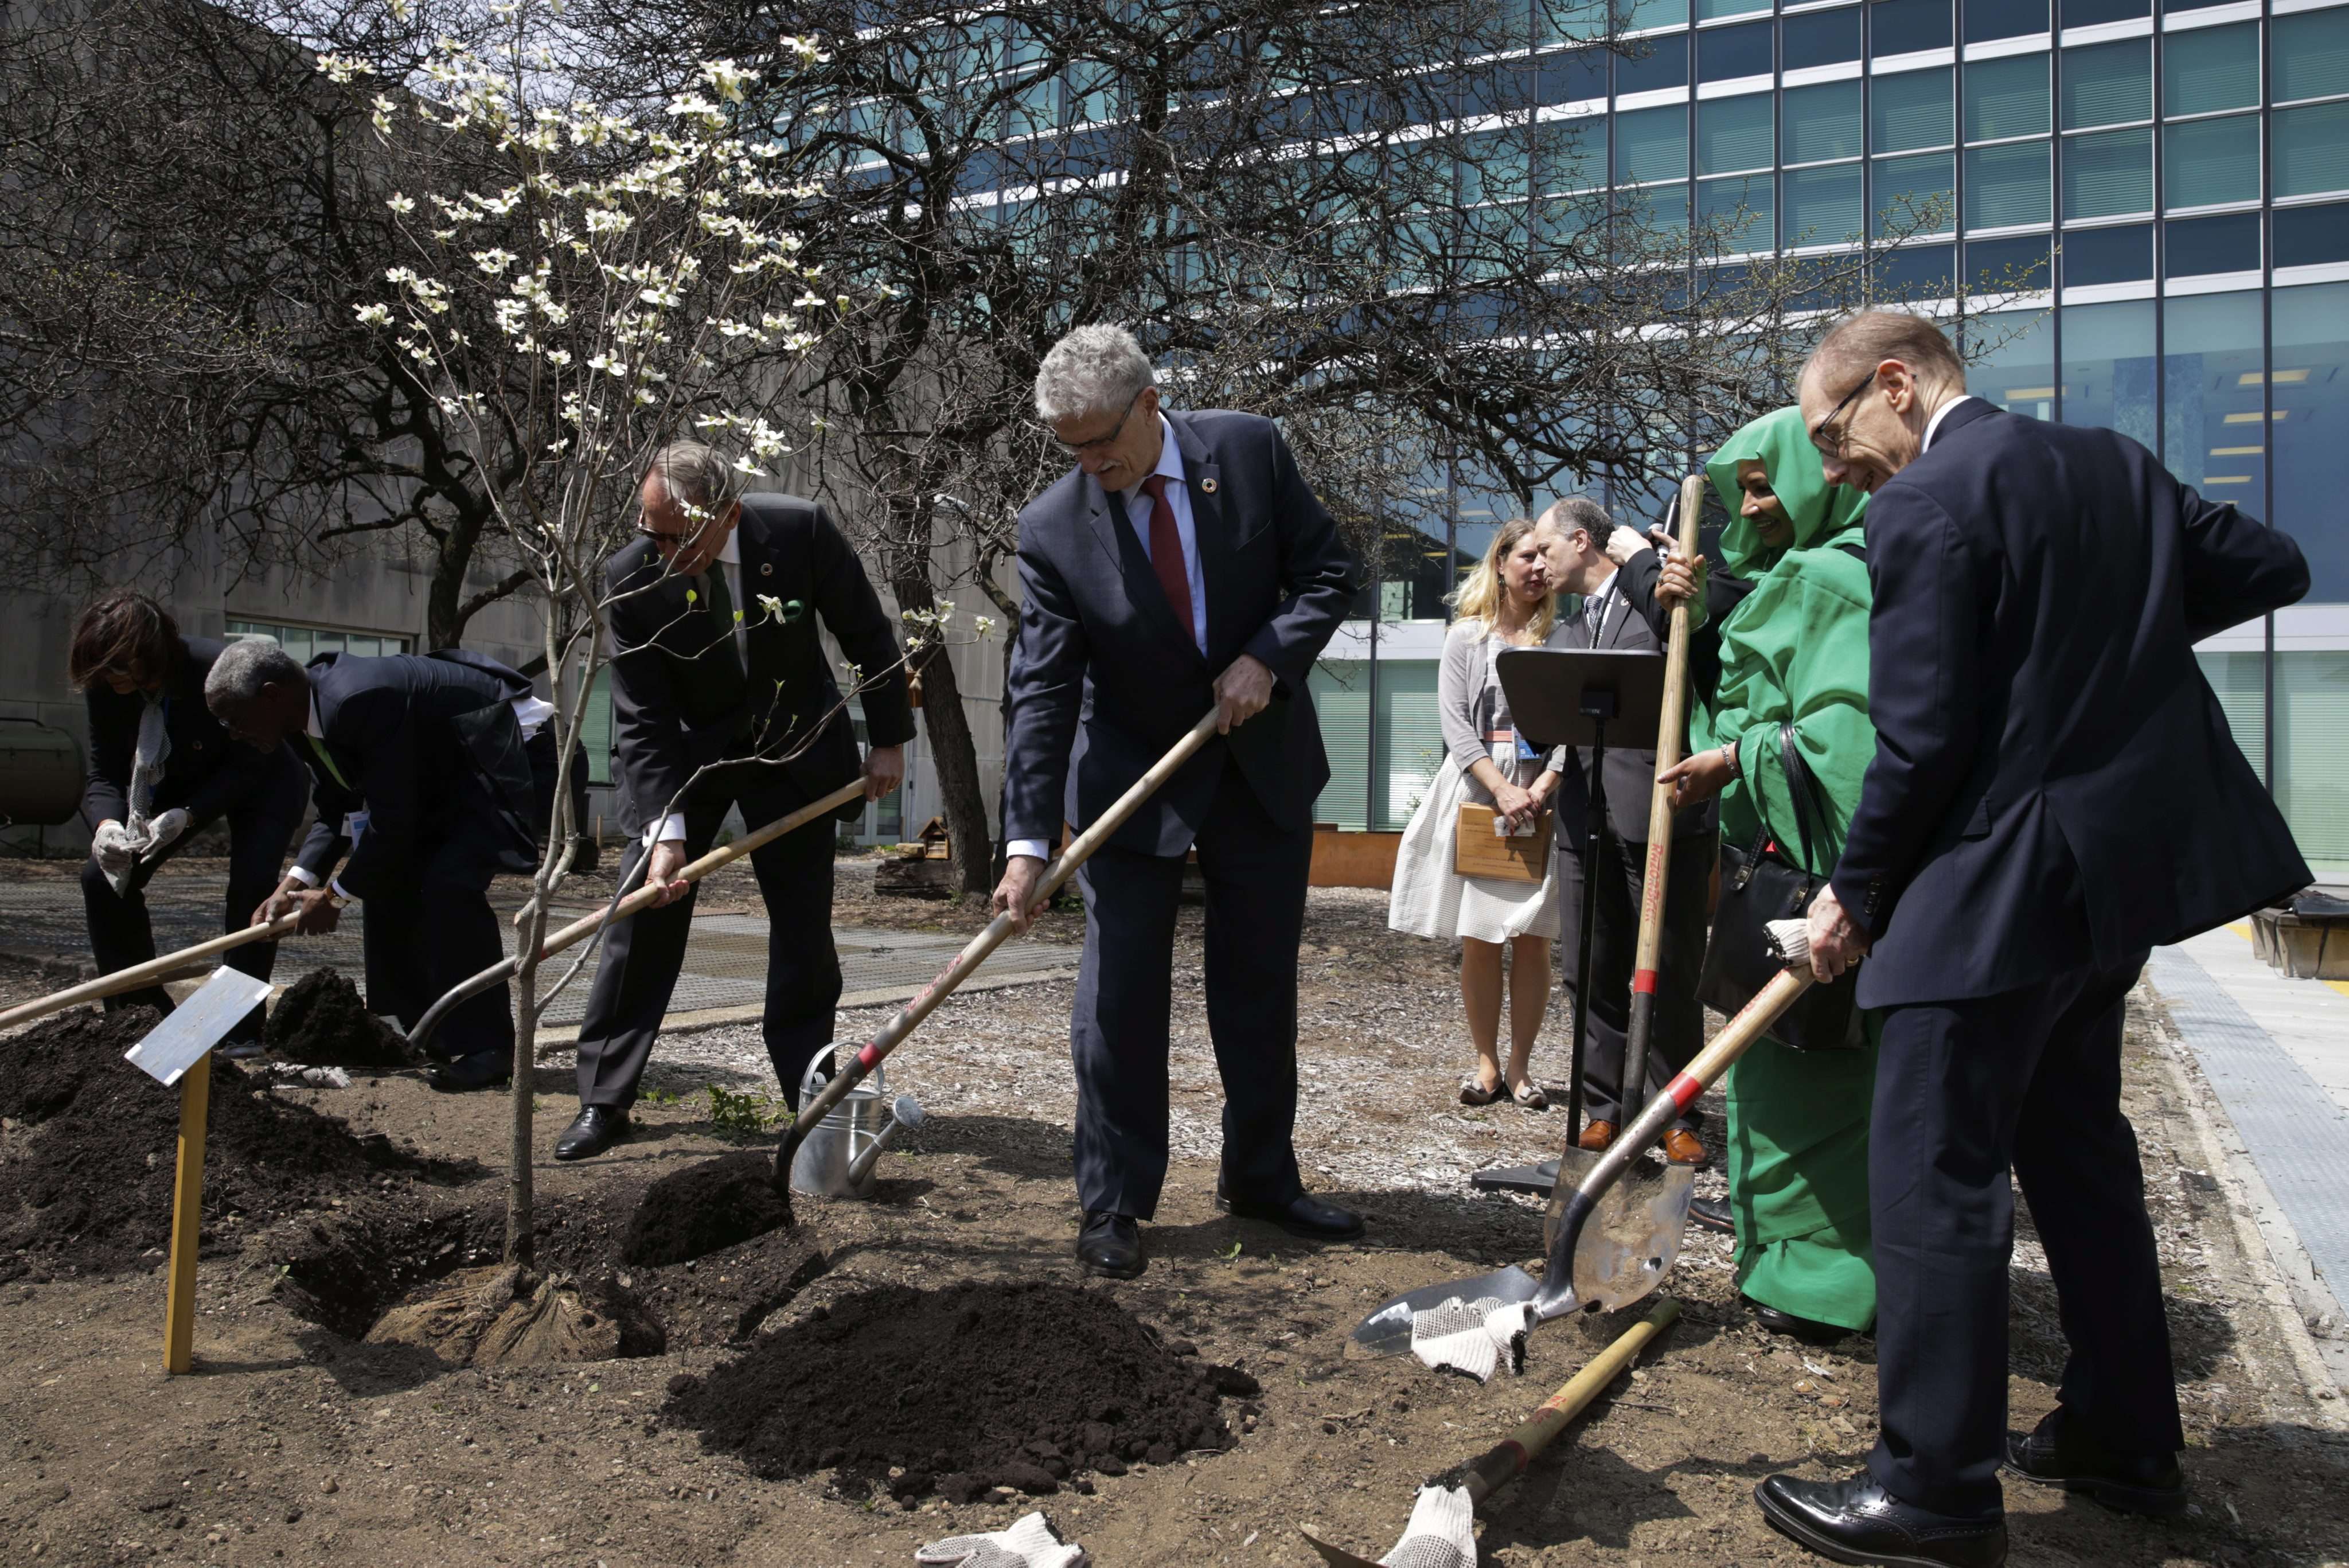 United Nations diplomats plant trees in the UN Food Garden on the occasion of Earth Day and the signing of the Paris agreement on climate change. Photo: EPA